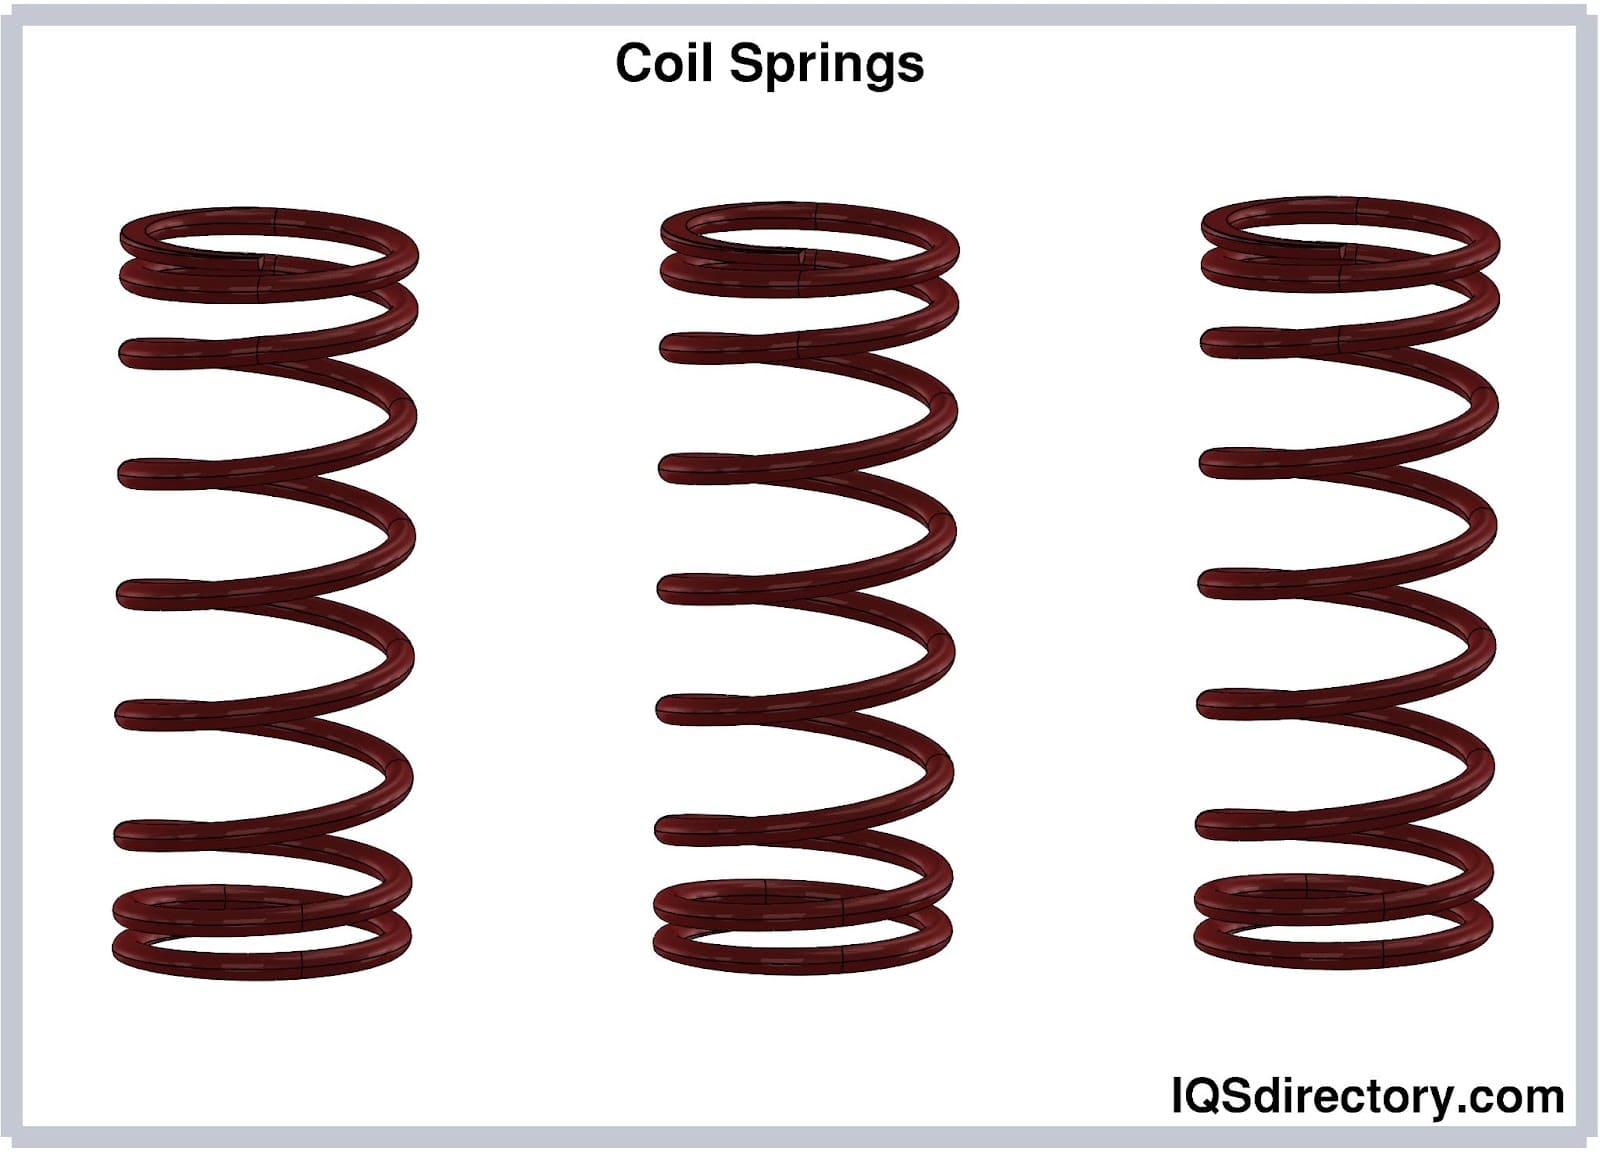 Coil Springs: Design, Metals Used, Types, and Coil Spring Ends